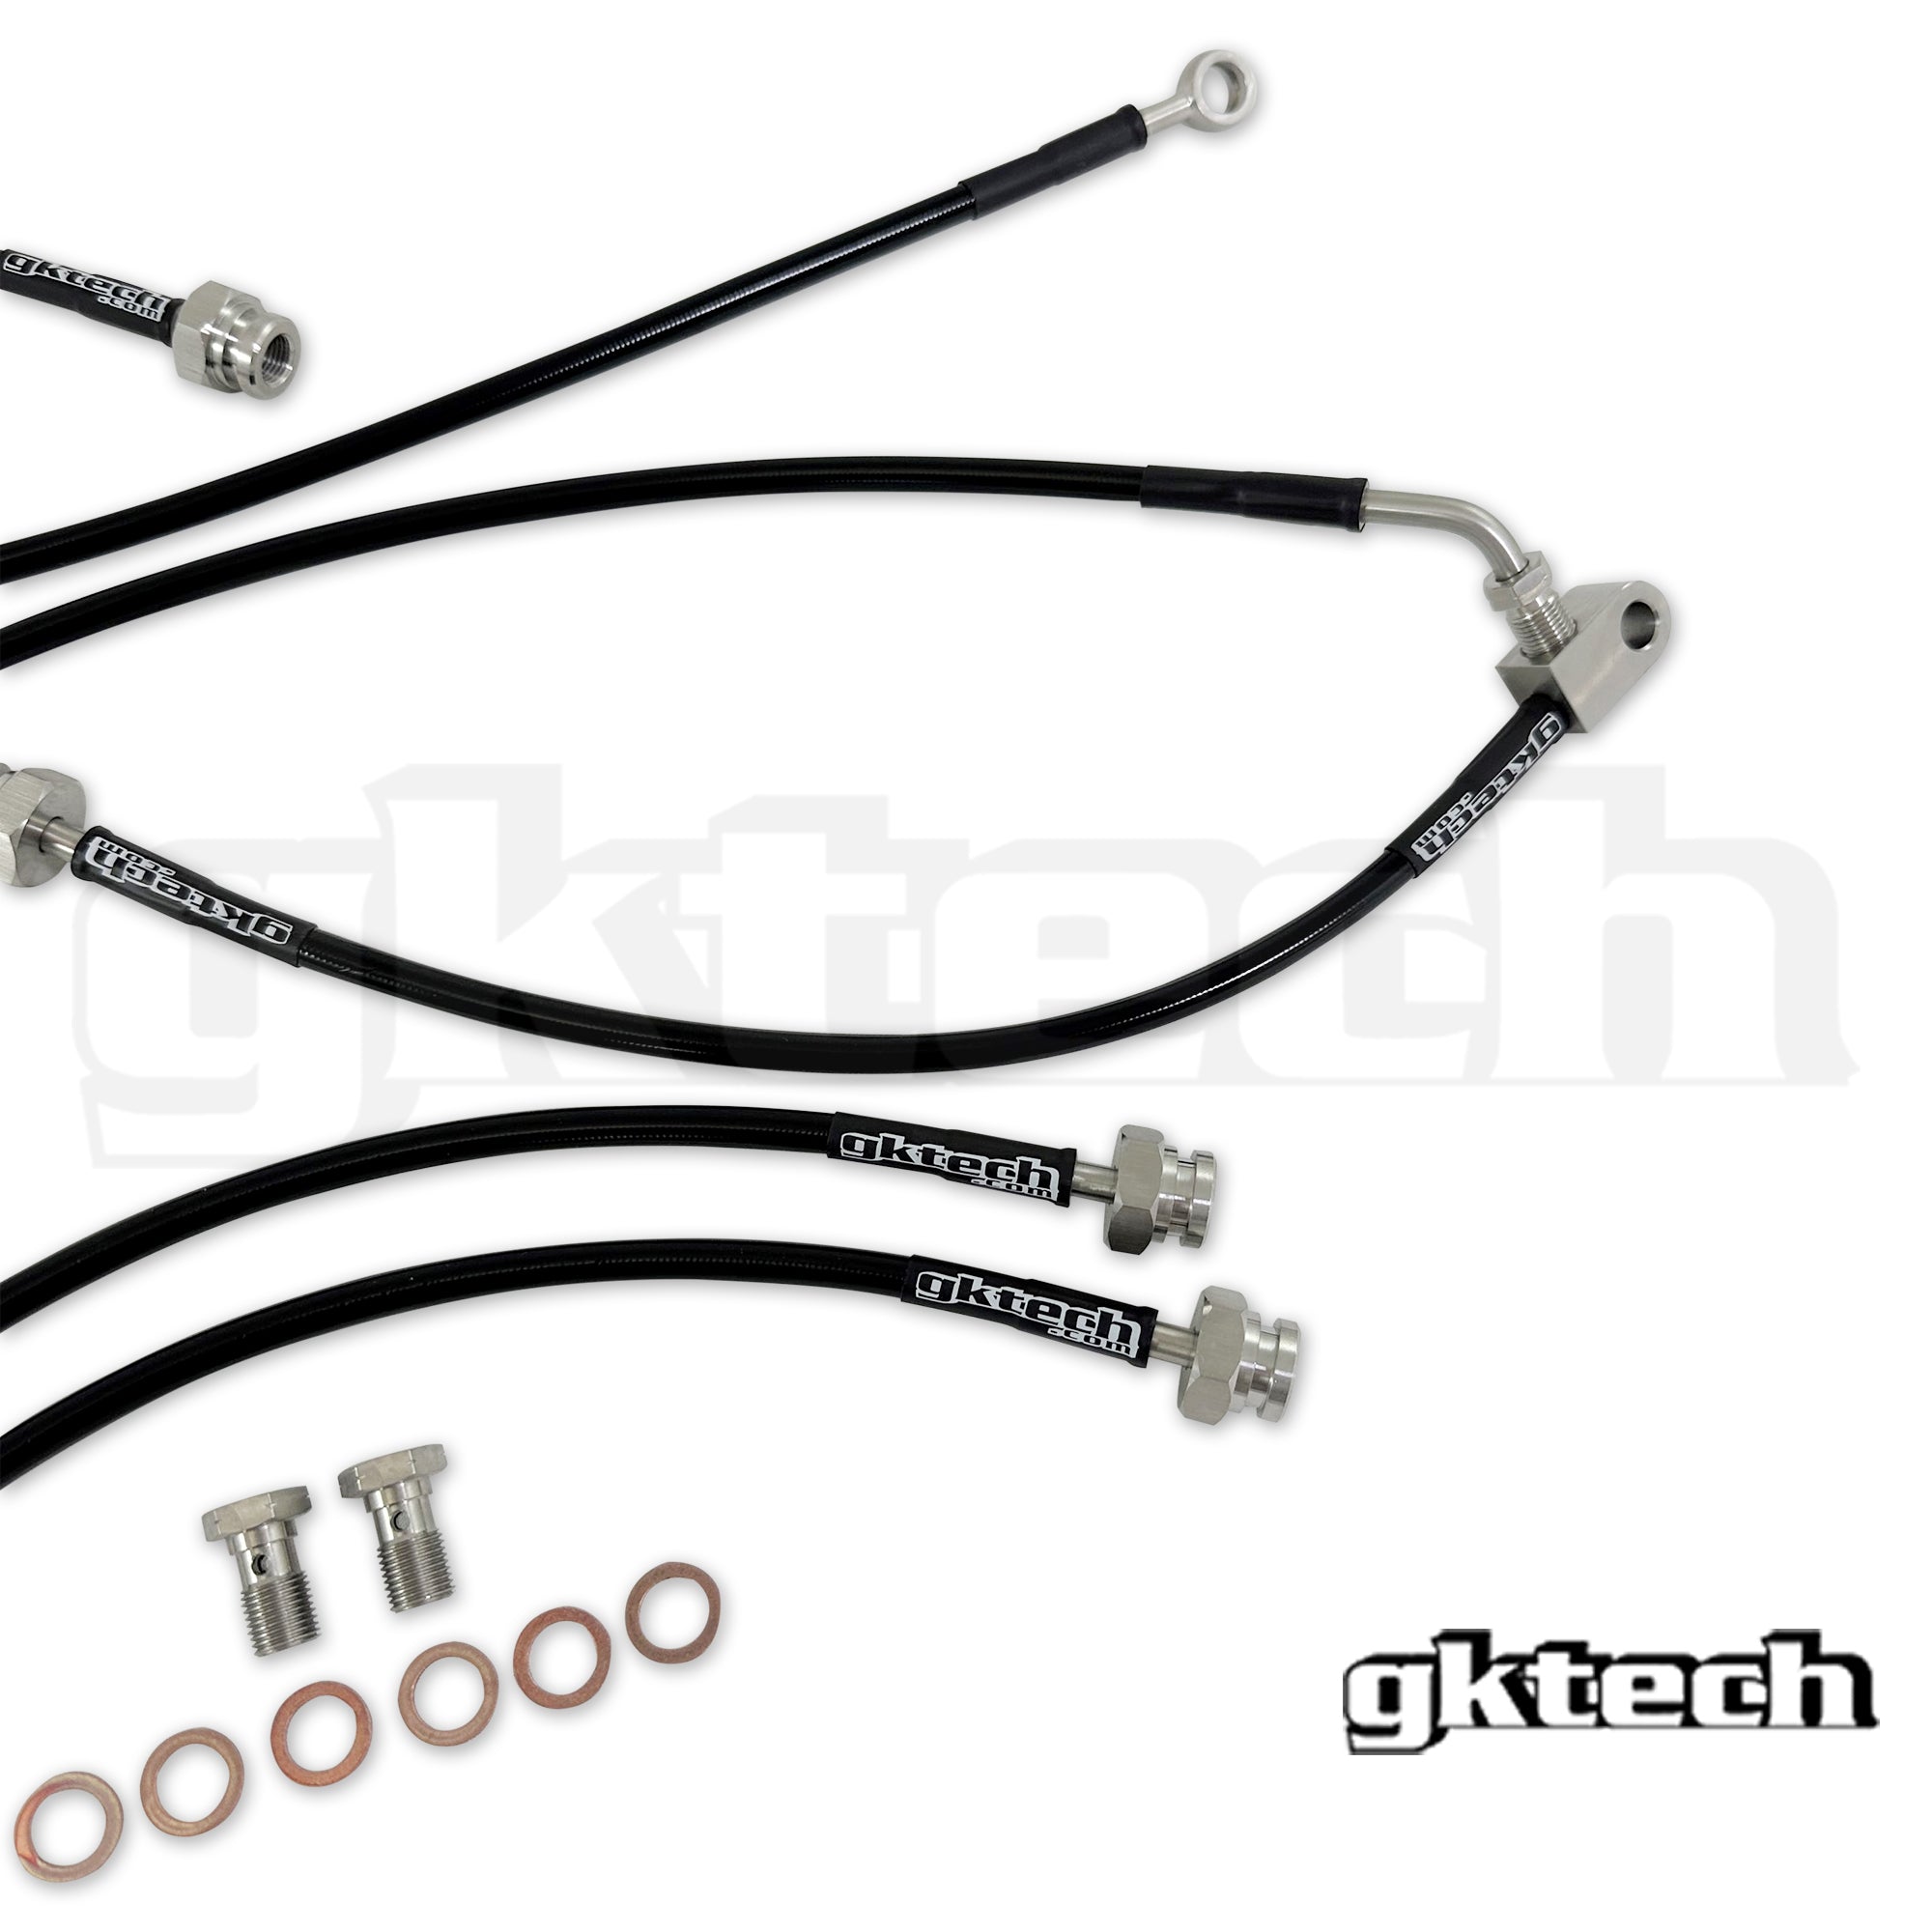 Z33 350z braided brake line set (front and rear)